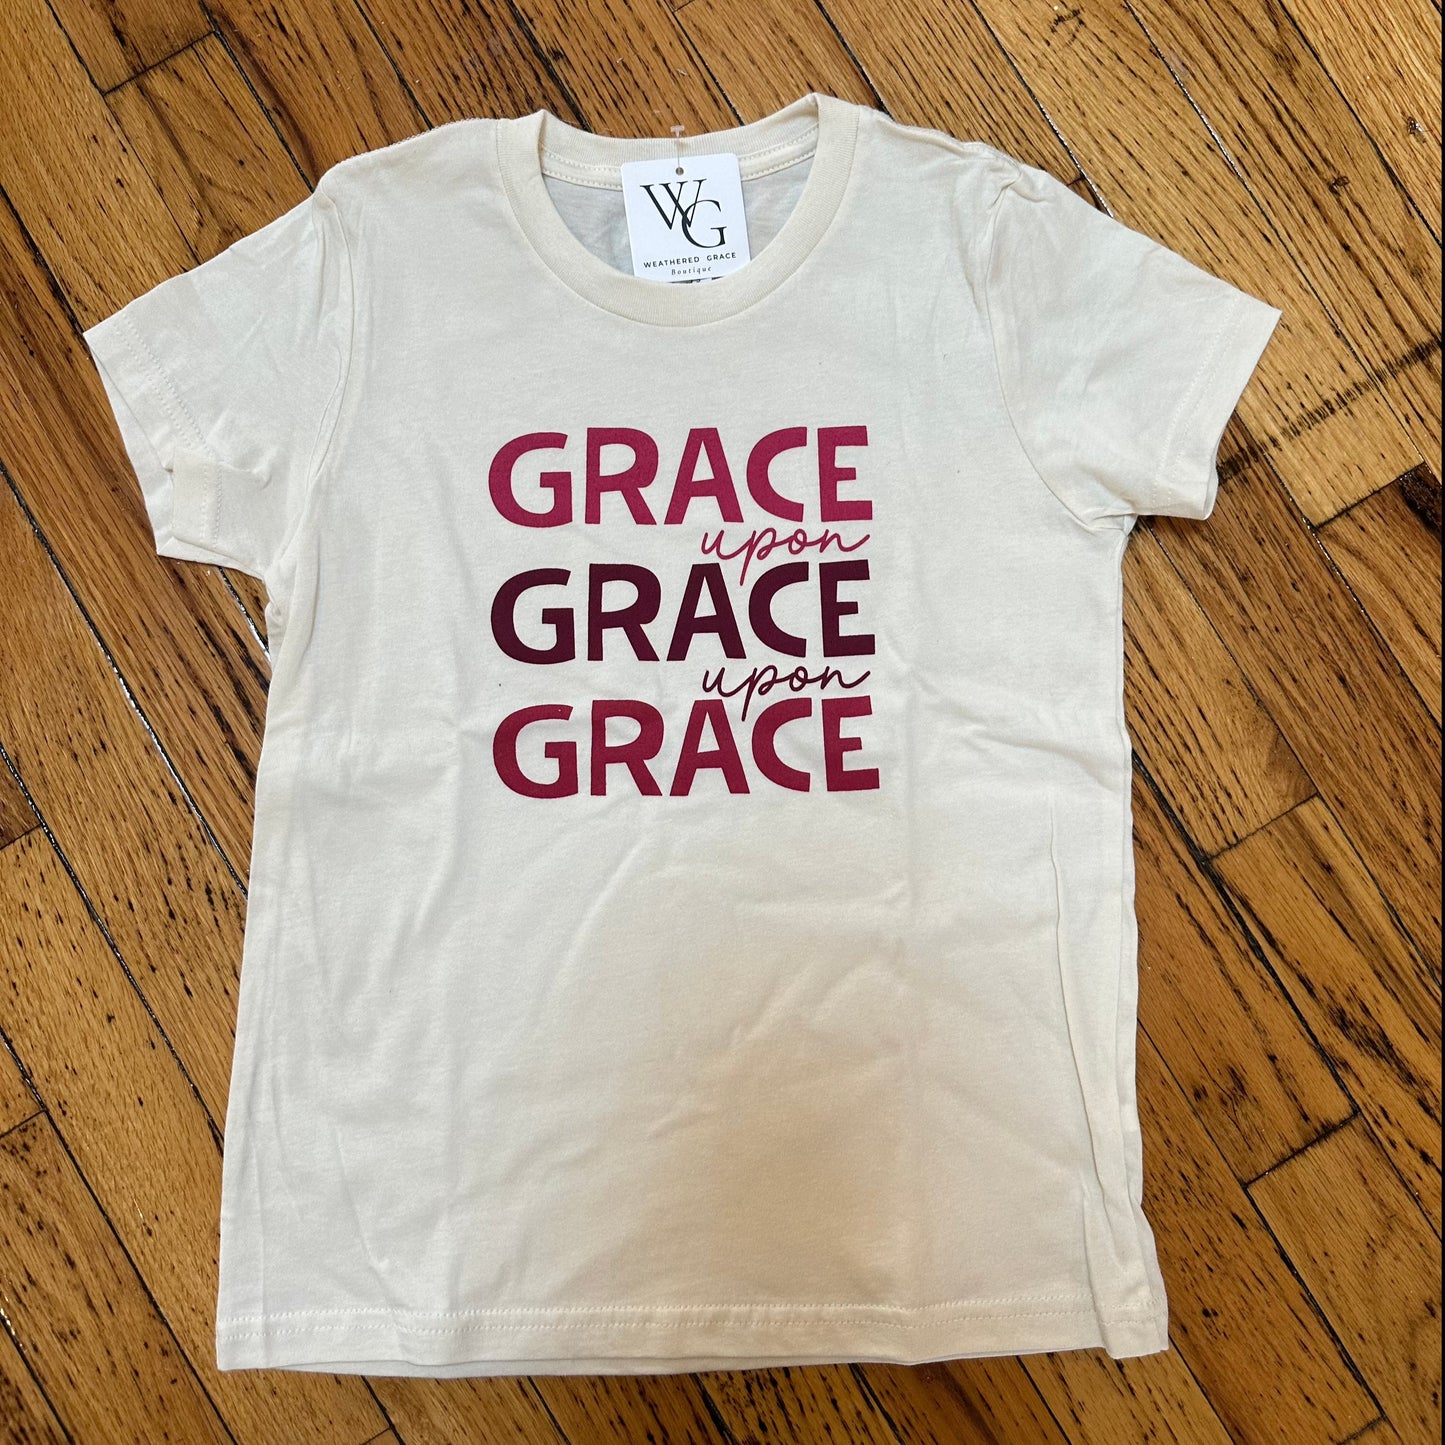 Grace upon Grace youth Tee